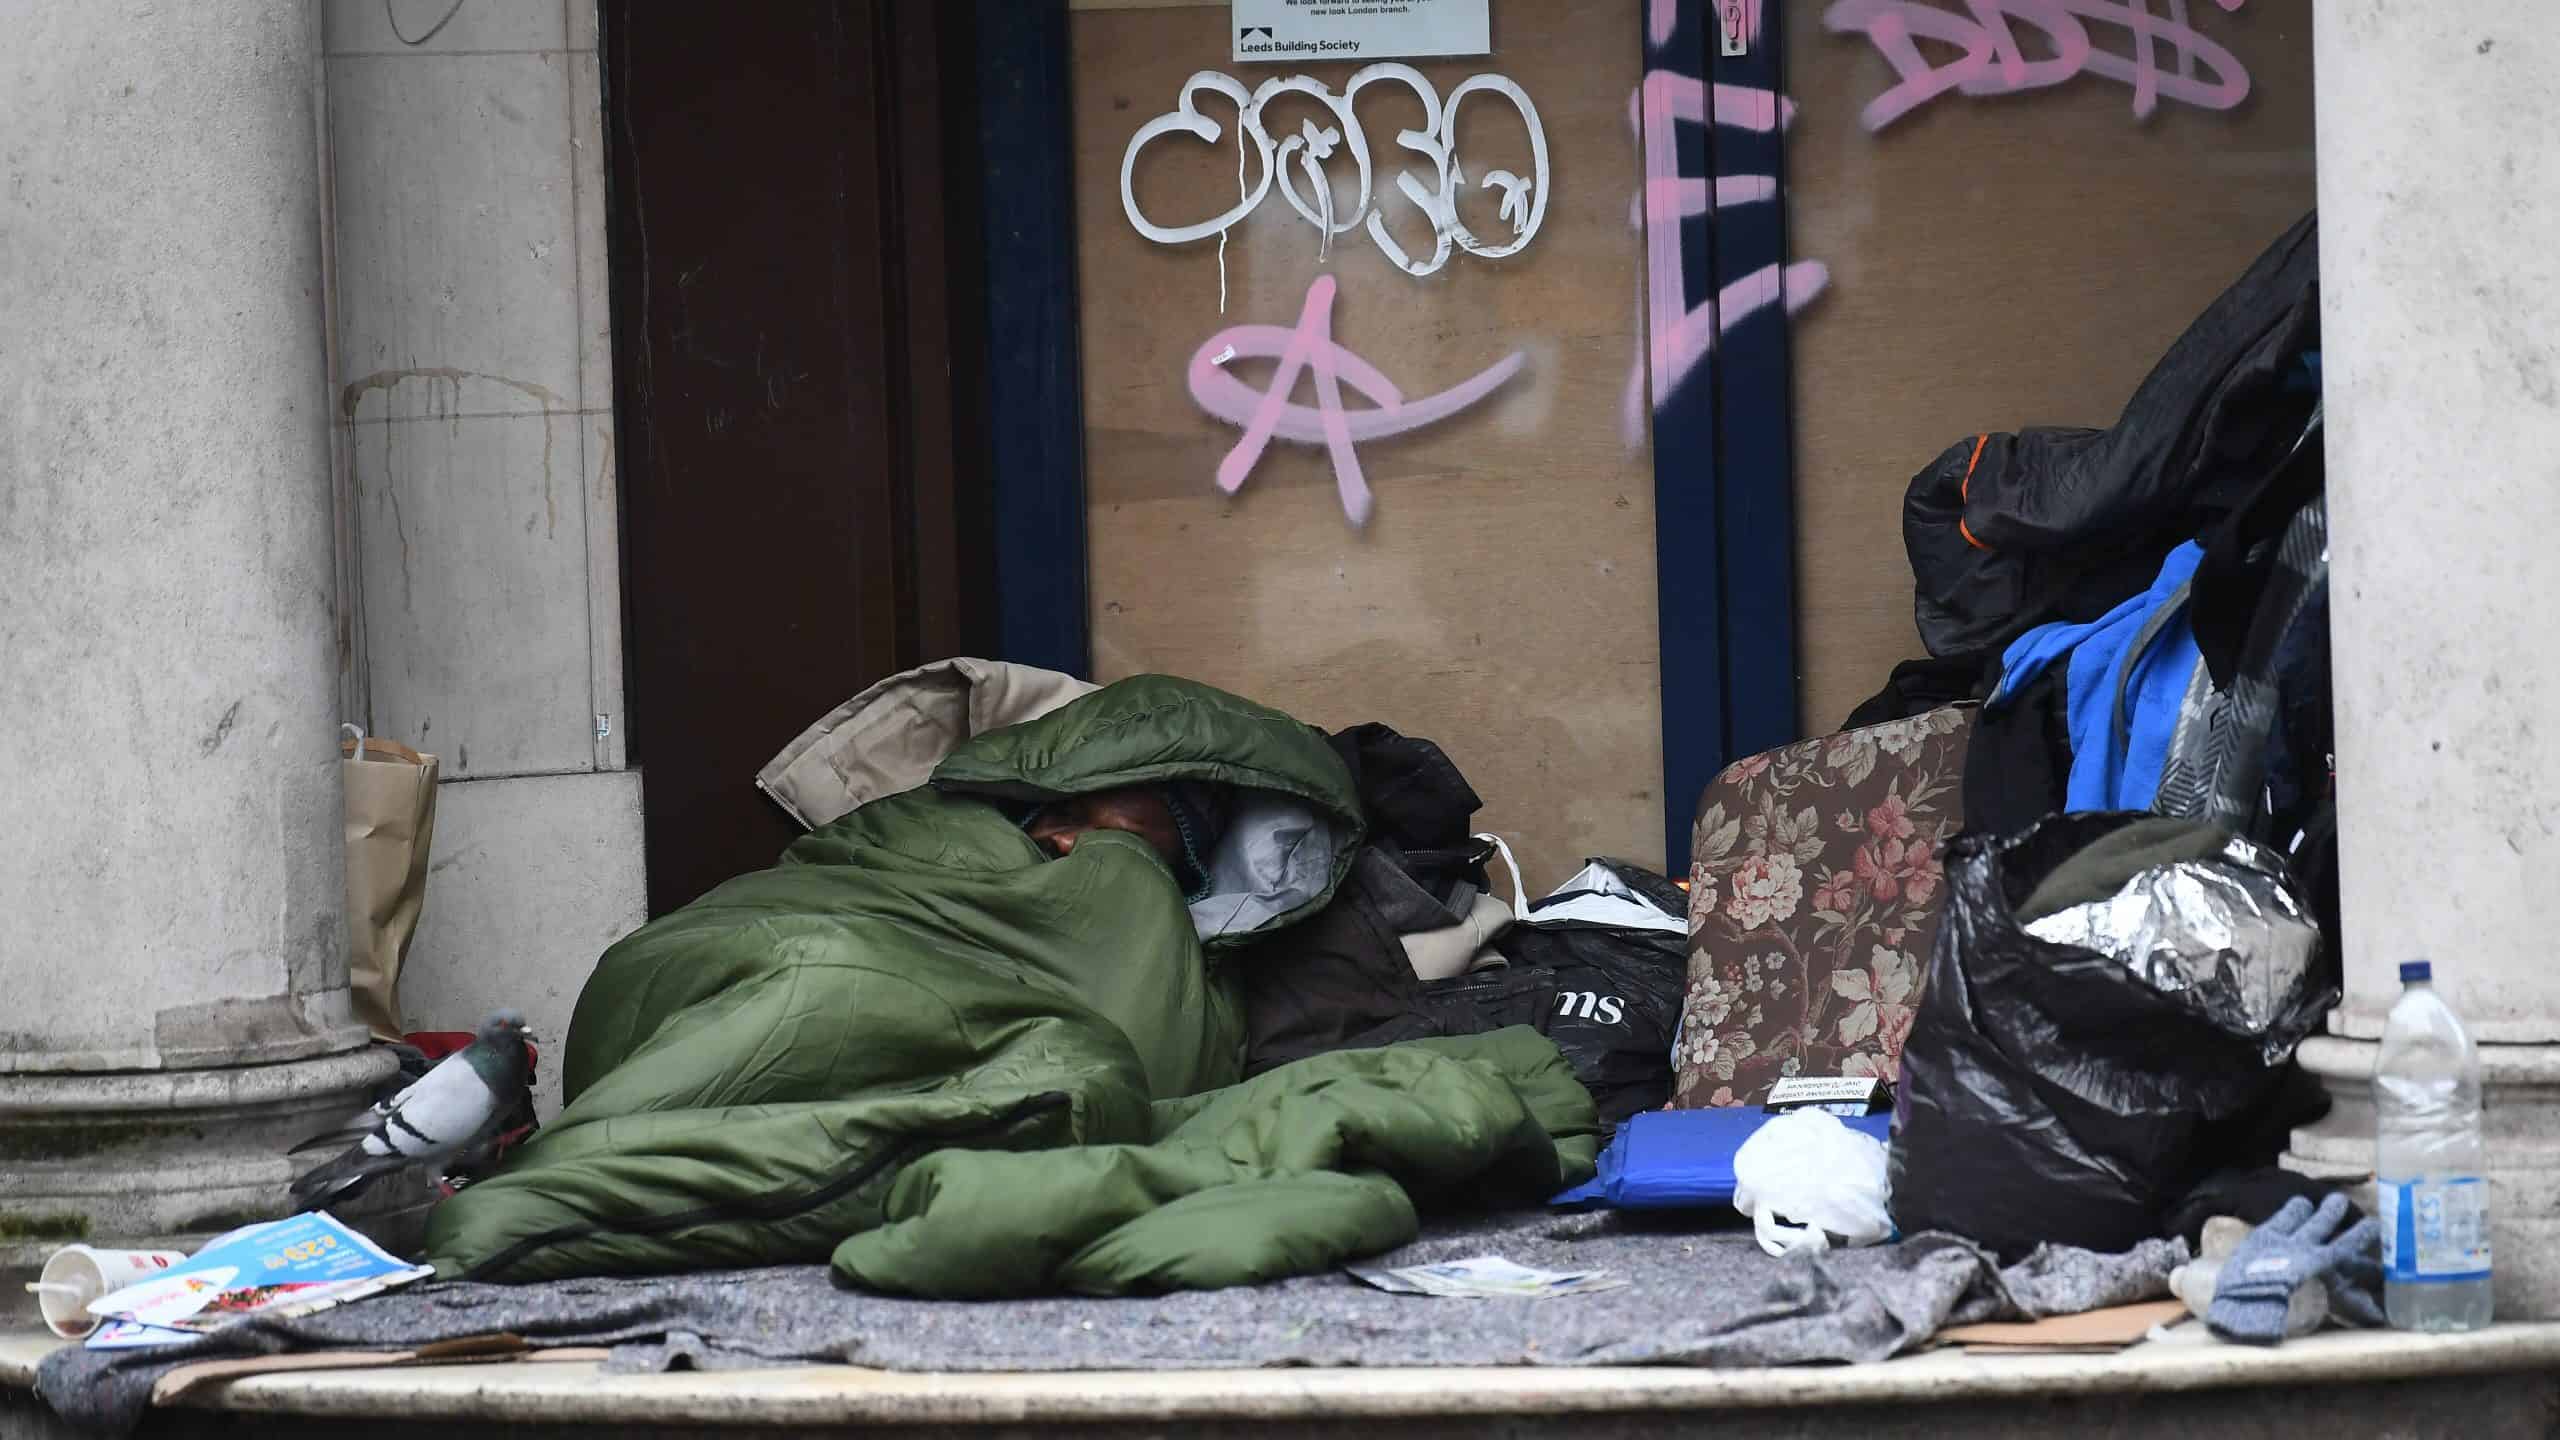 Cost-of-living crisis: Bleak estimate for number of people sleeping rough by 2024